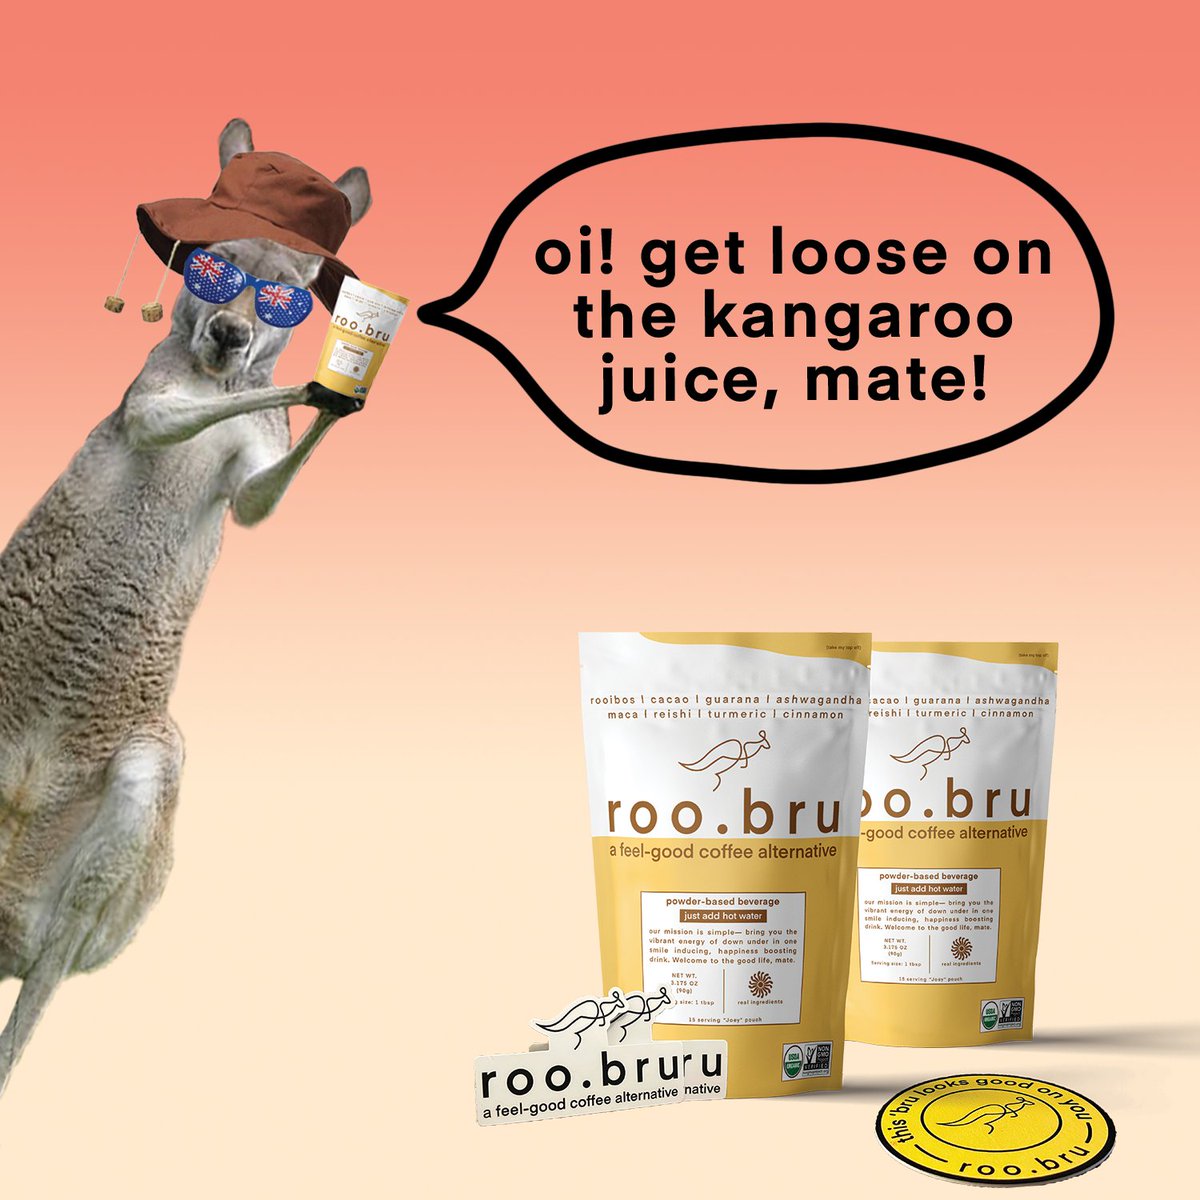 Ever gotten loose on the kangaroo juice? 

If not, it's about bloody time you try our stuff and see why our roo.bru family doesn't get tired anymore #alldayenergy

🦘drinkroobru.com 🦘

#healthycoffee #coffeealternative #coffeesubstitute #healthandwellness #seewhy